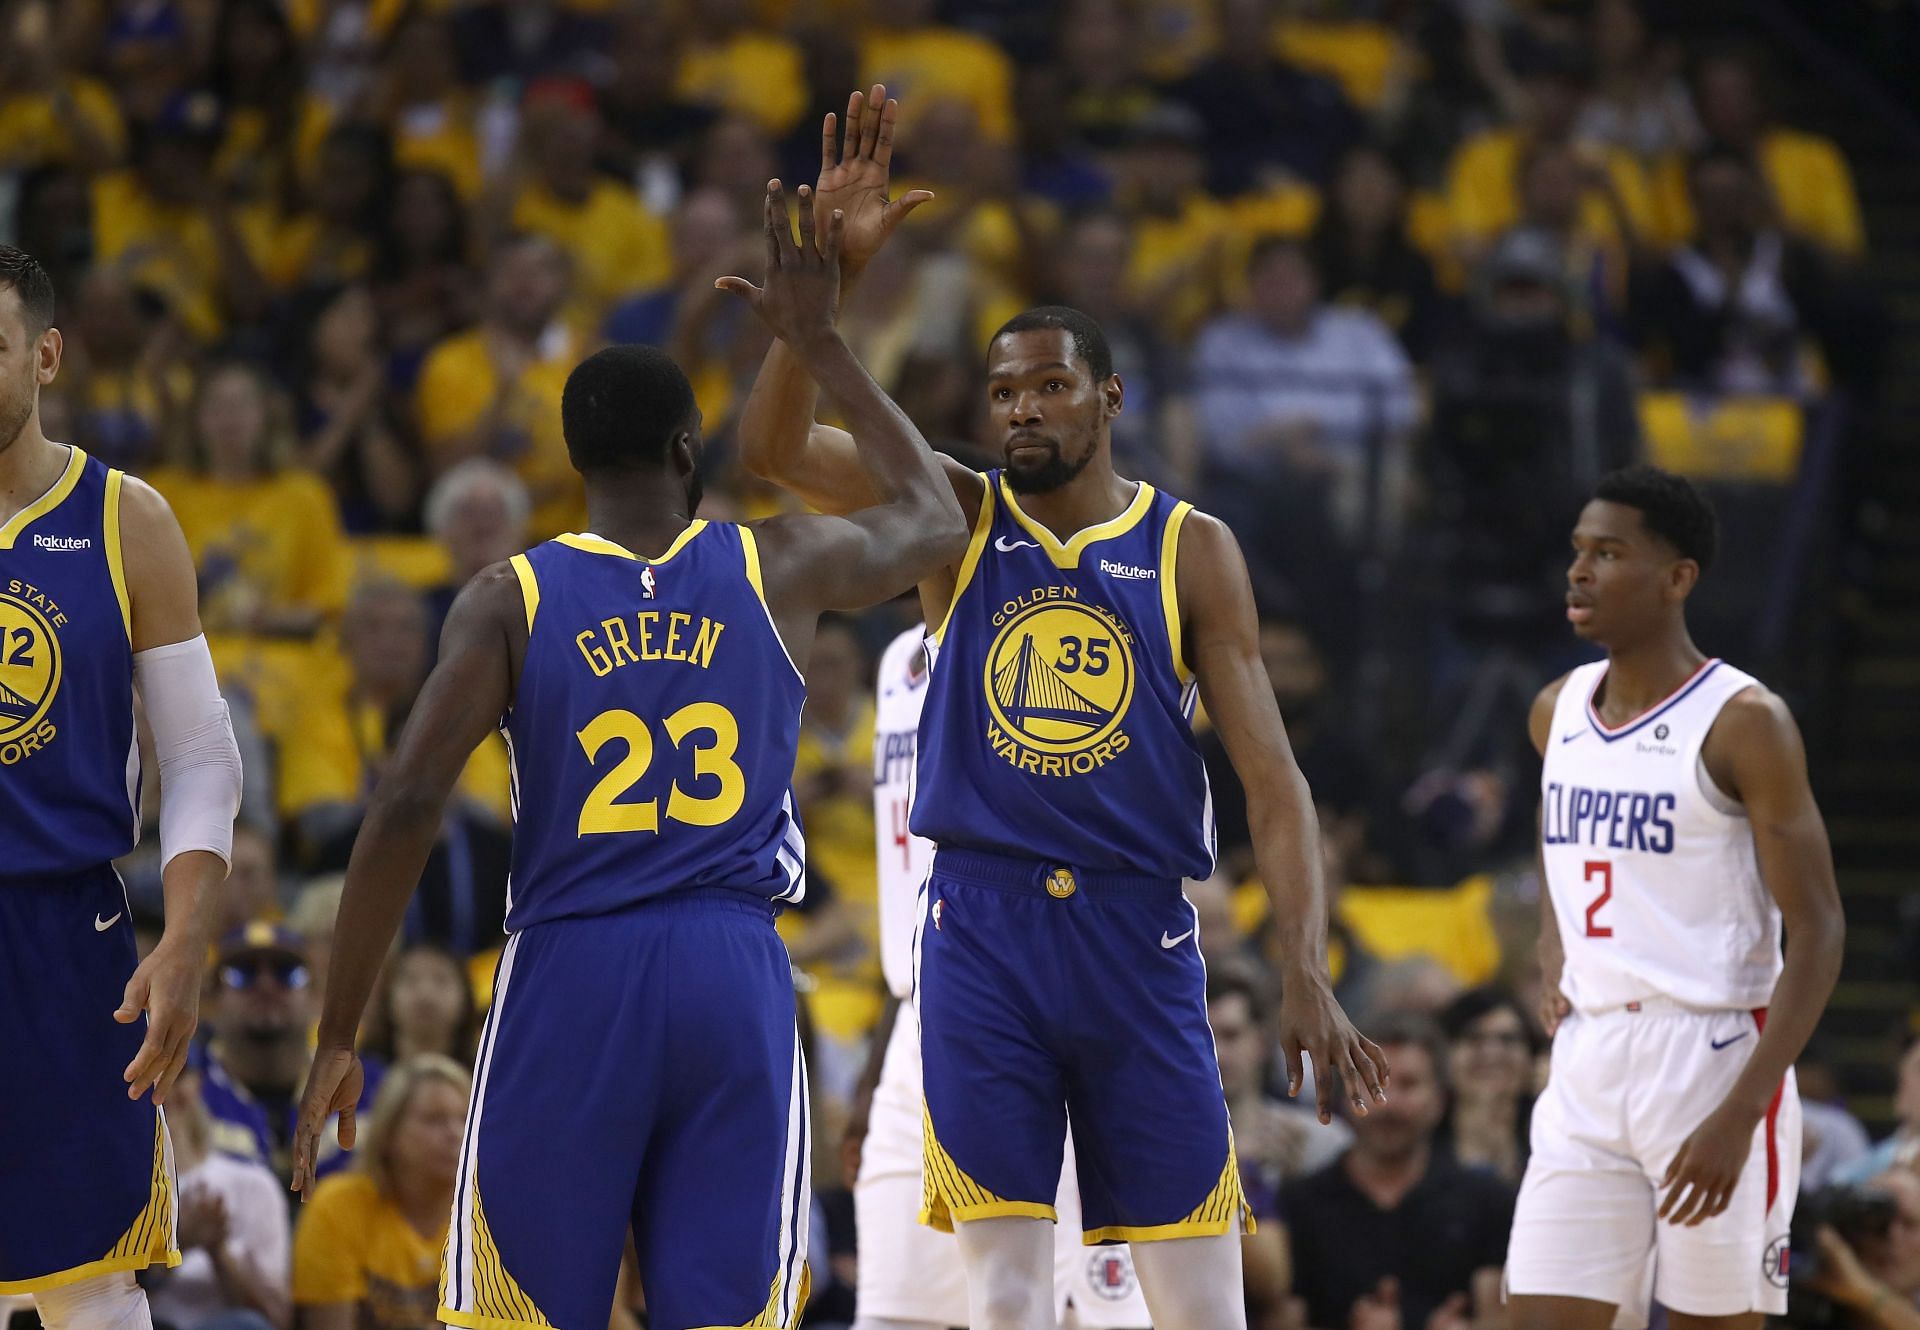 Draymond Green and Kevin Durant share the floor for the Golden State Warriors